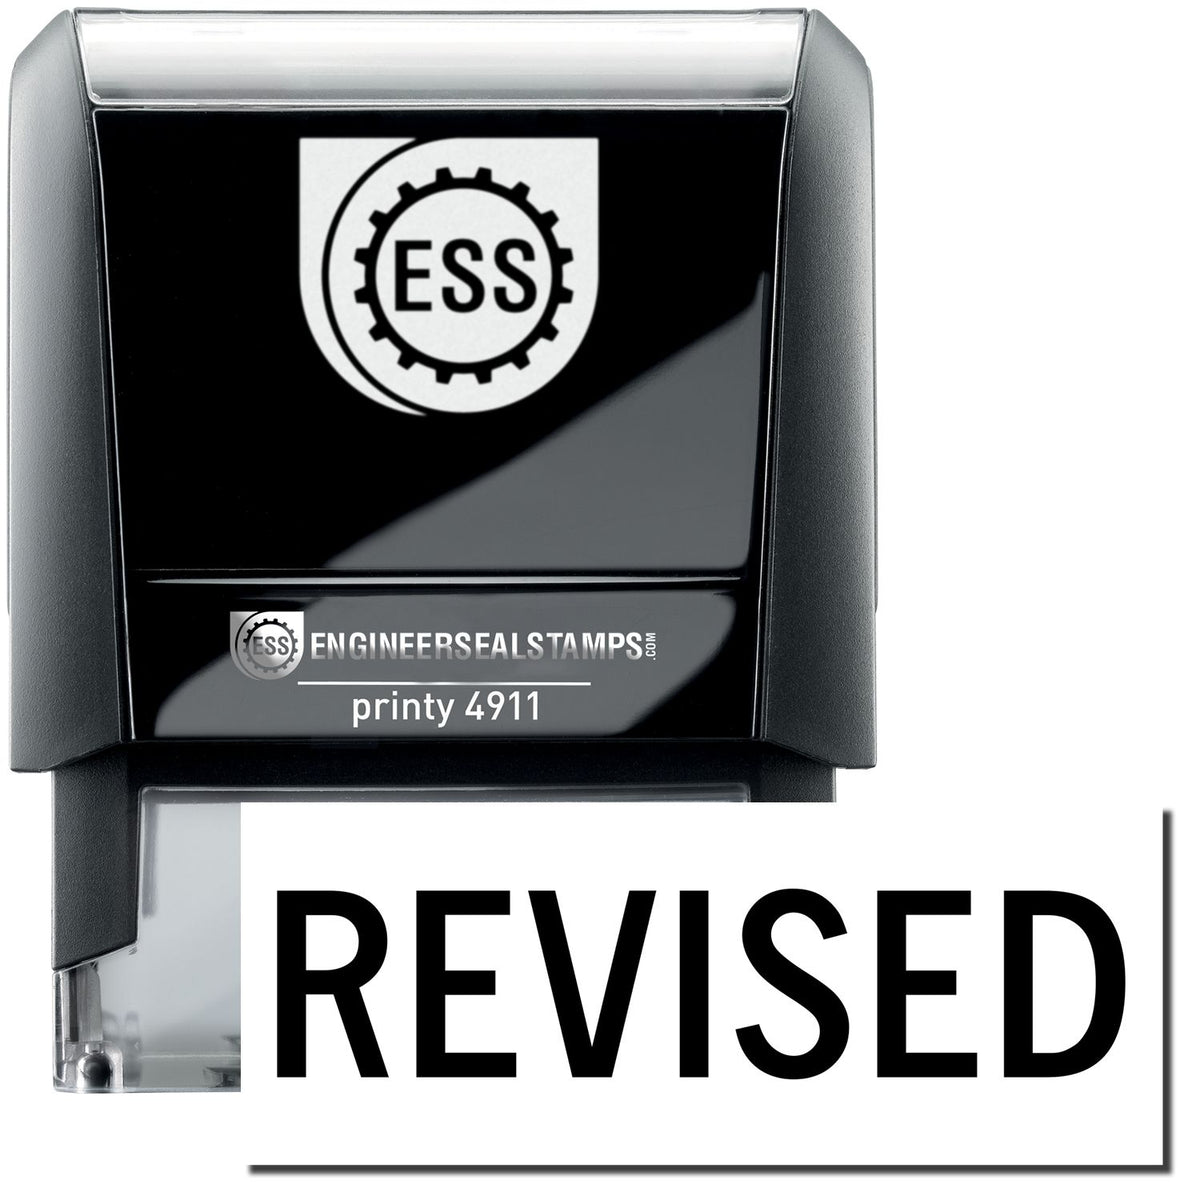 A self-inking stamp with a stamped image showing how the text &quot;REVISED&quot; is displayed after stamping.